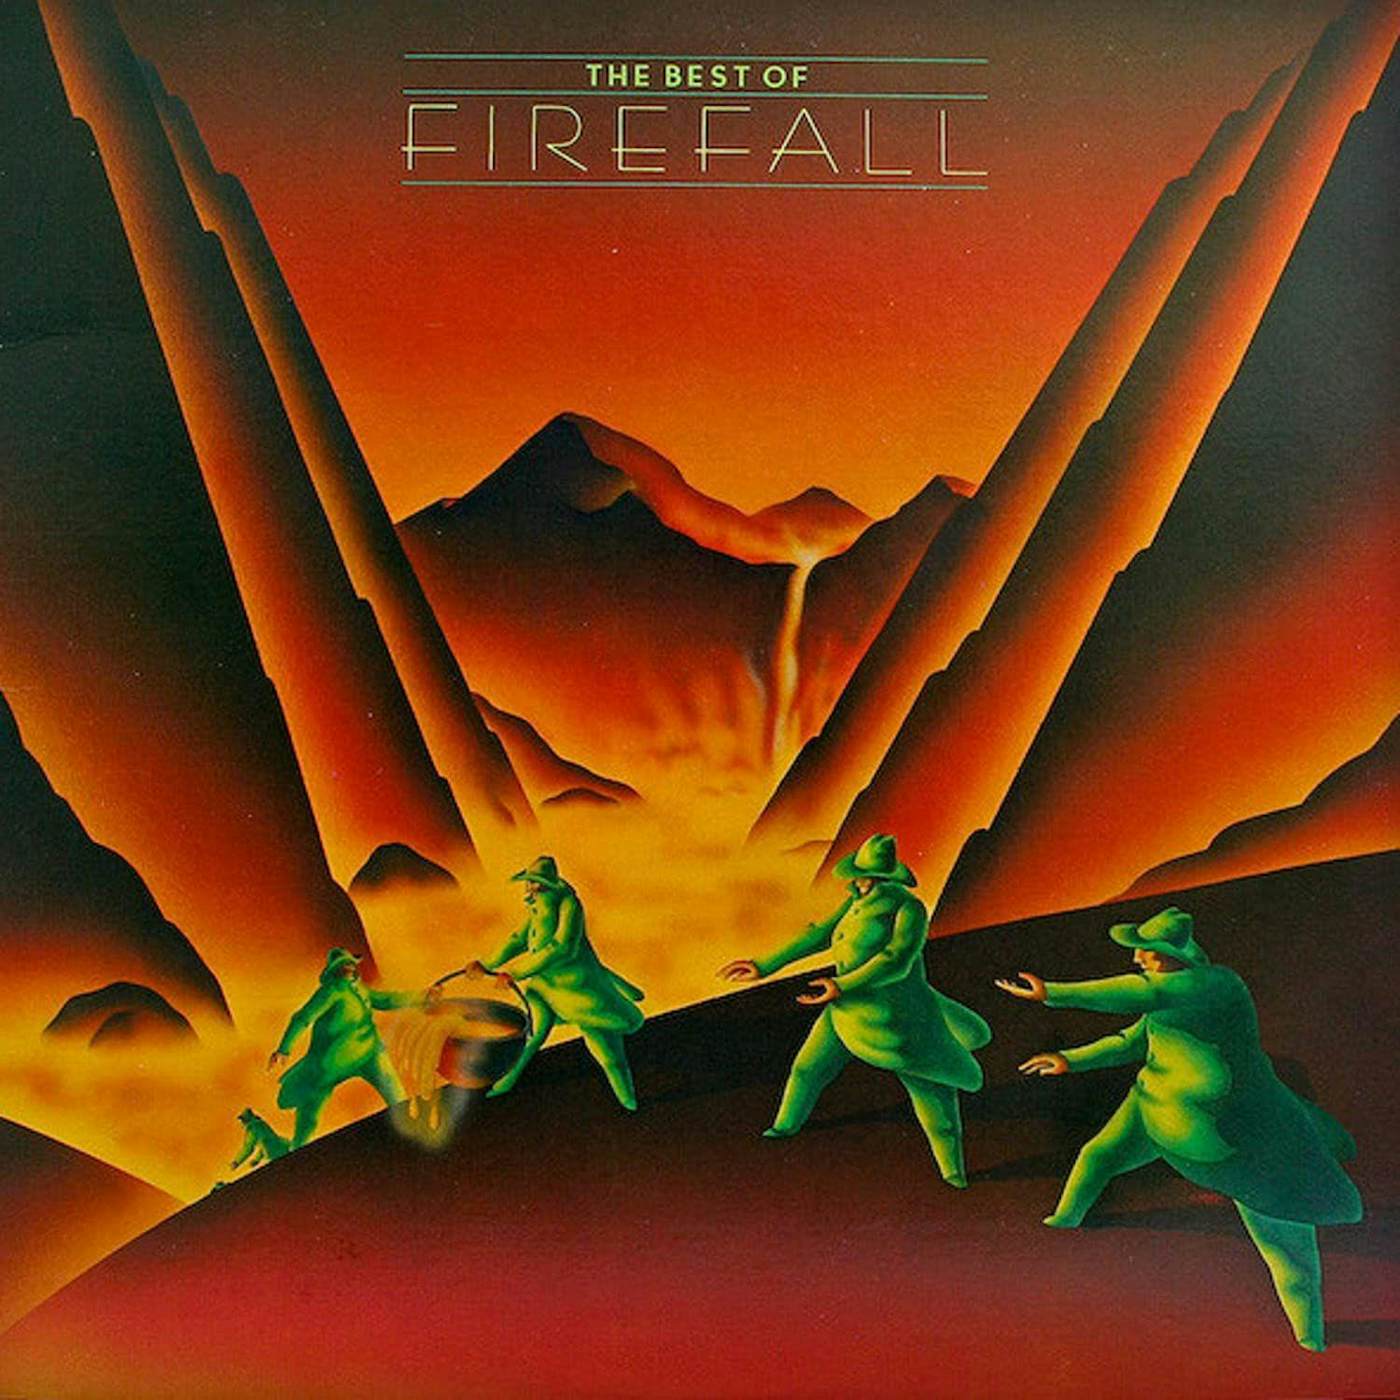 The Best Of Firefall (Translucent Limited Anniversary Edition) Vinyl Record